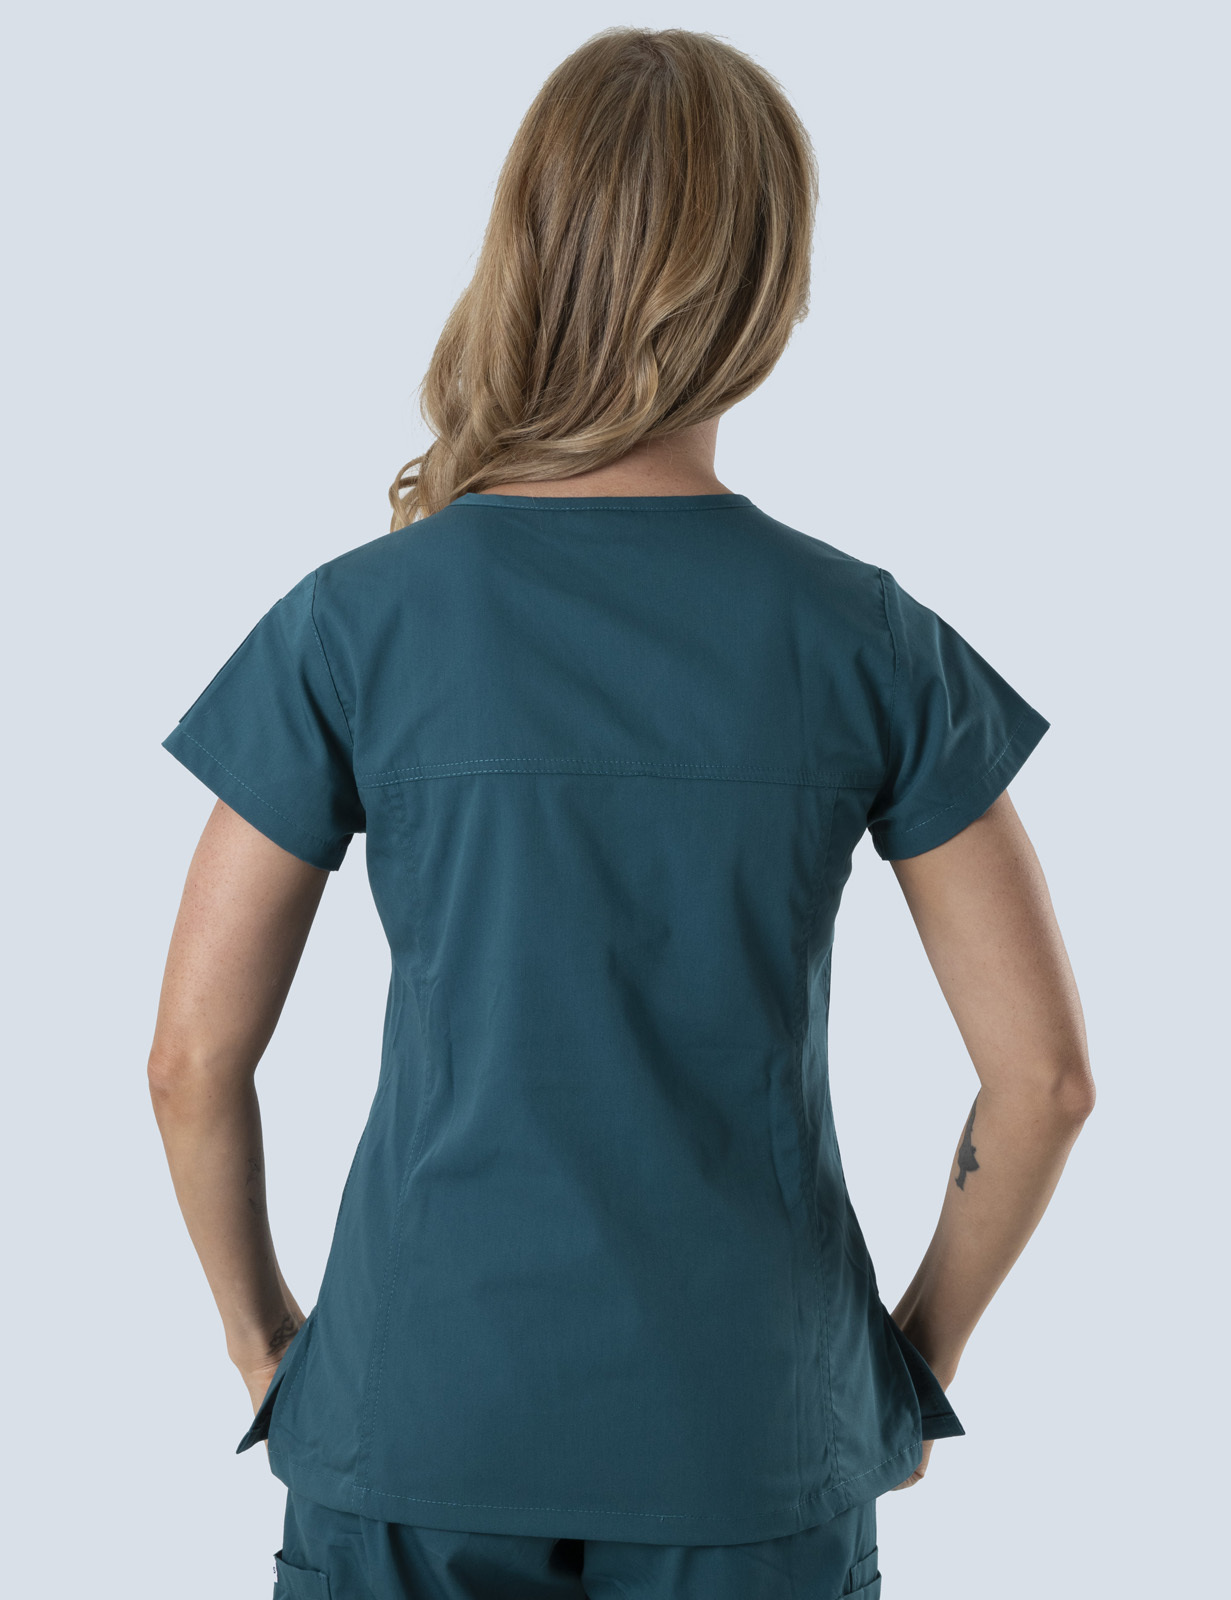 Women's Fit Solid Scrub Top - Caribbean - 3X Large